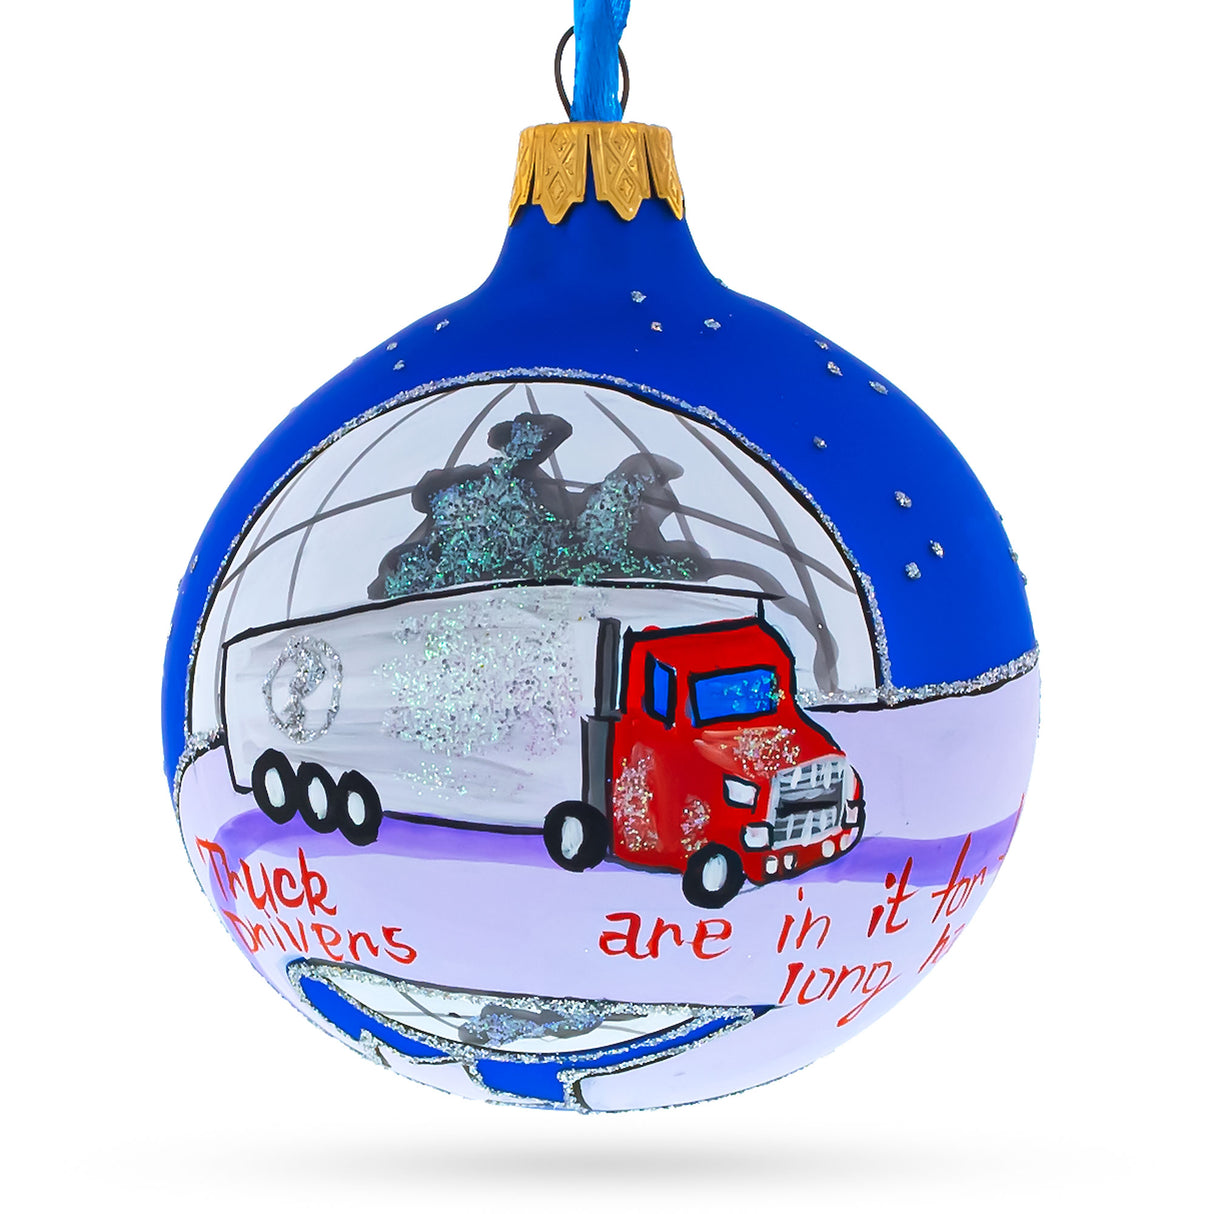 Hardworking Truck Driver - Blown Glass Ball Christmas Ornament 3.25 Inches in Blue color, Round shape